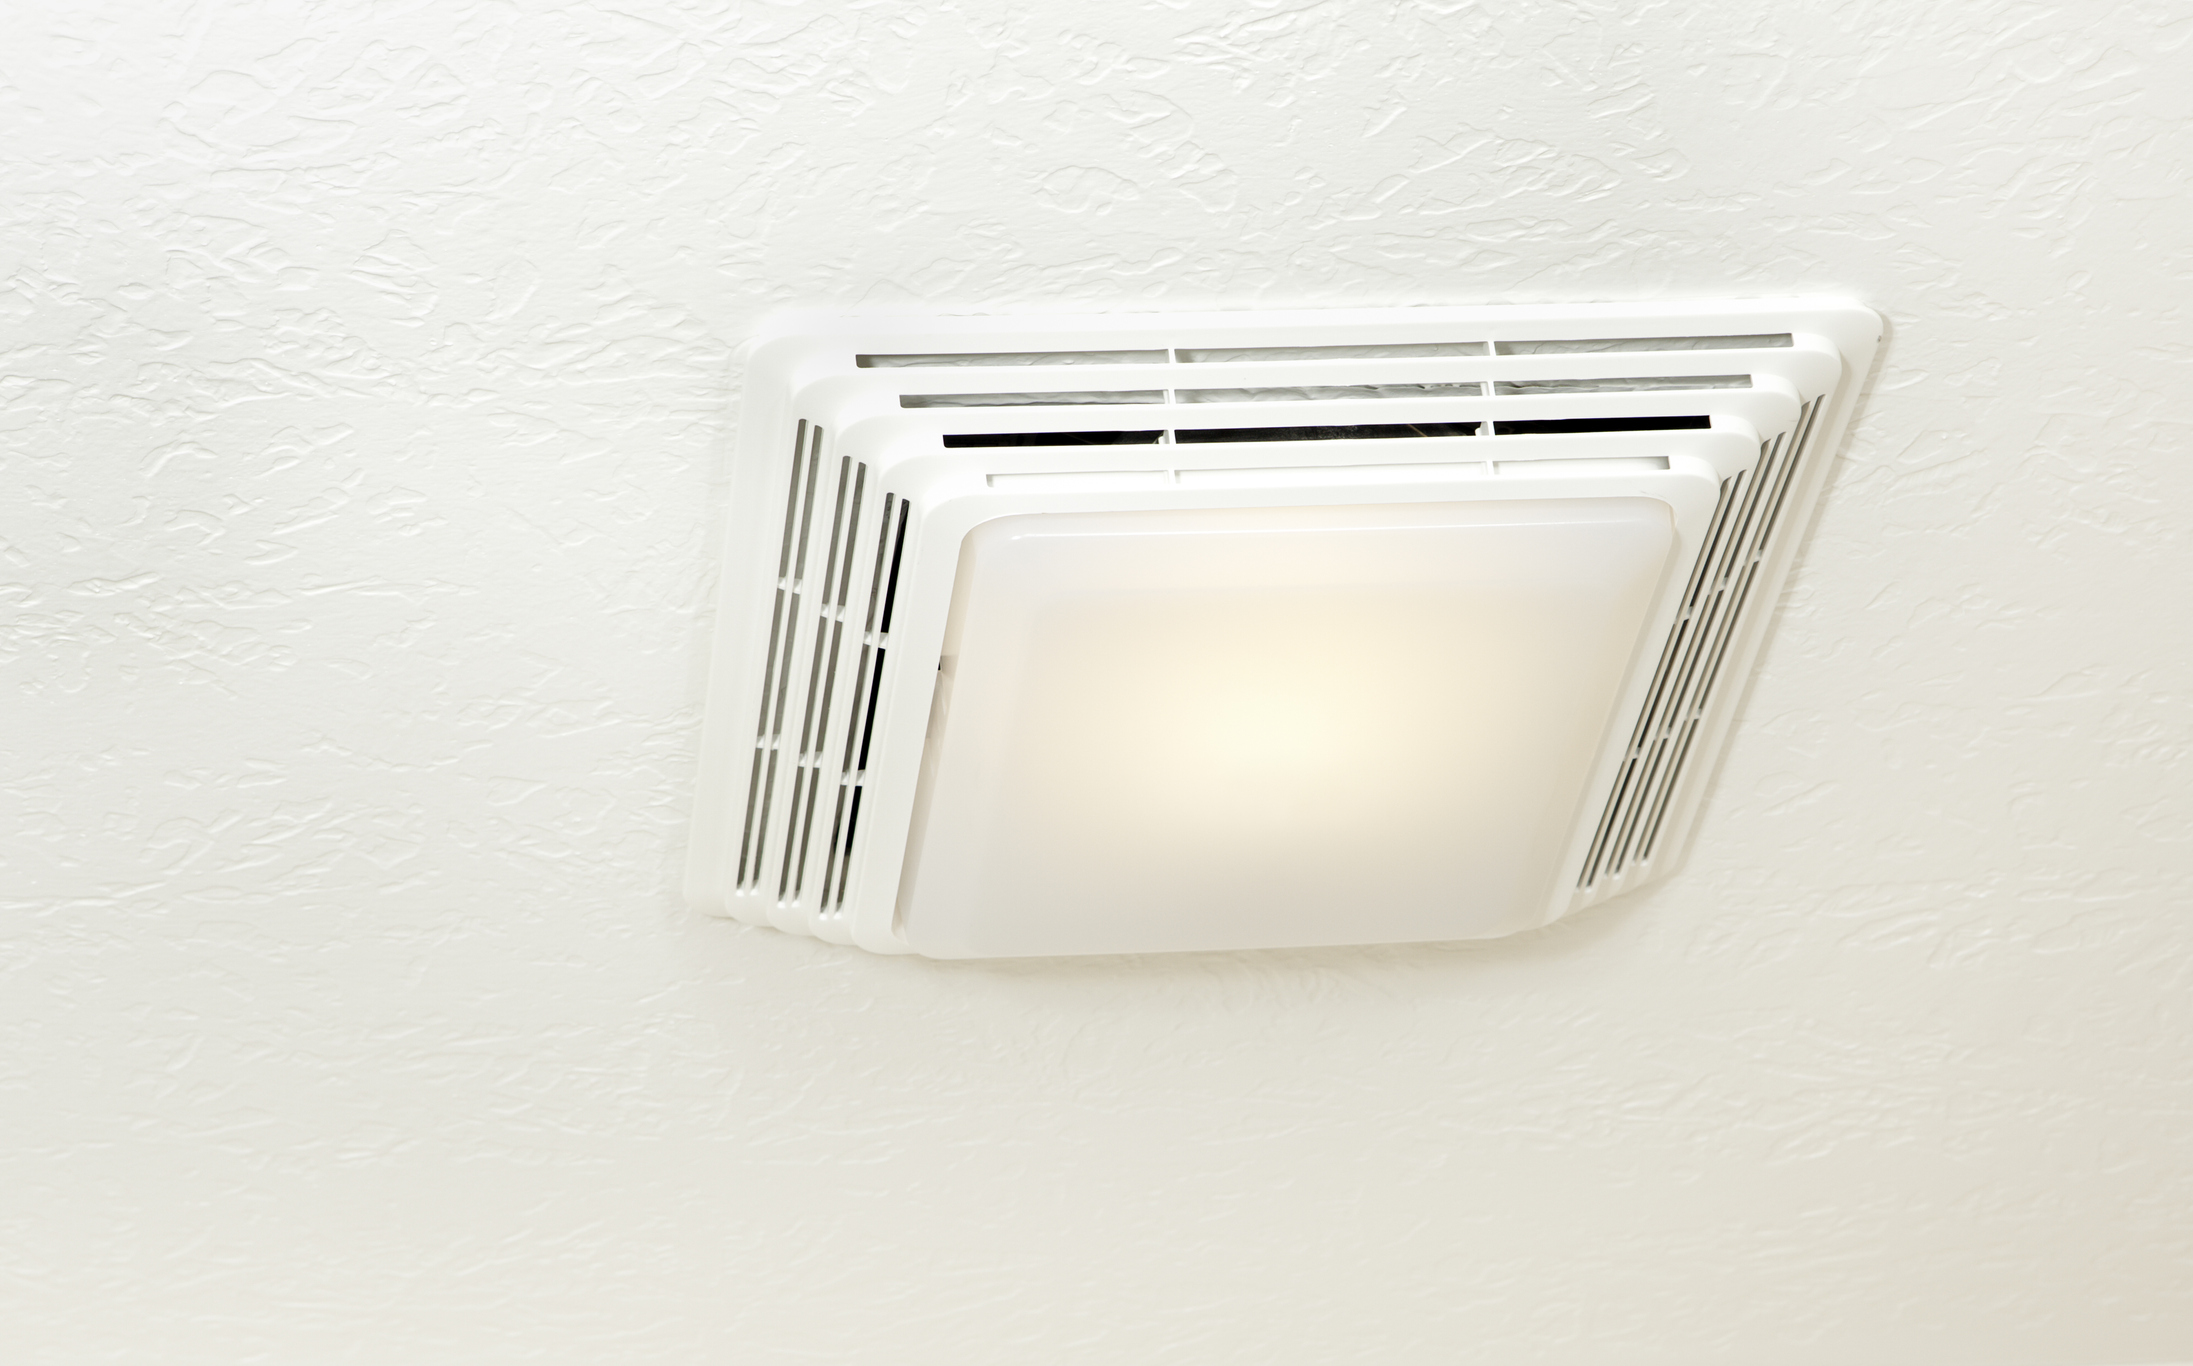 Enhancing Comfort and Functionality: The Bathroom Heater Fan Light